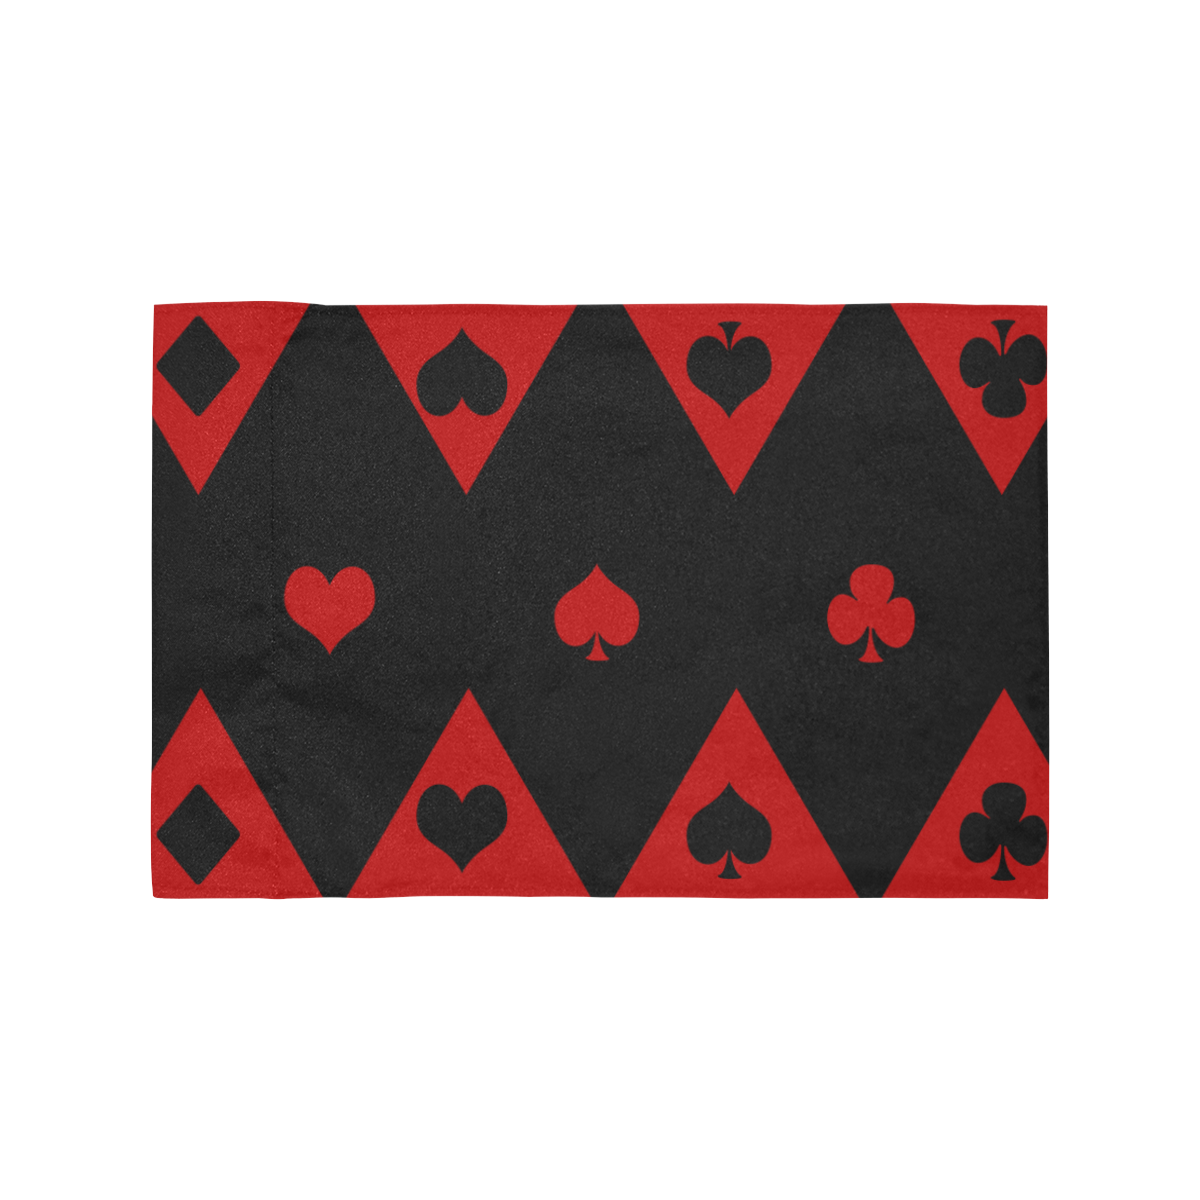 Las Vegas Black Red Play Card Shapes Motorcycle Flag (Twin Sides)